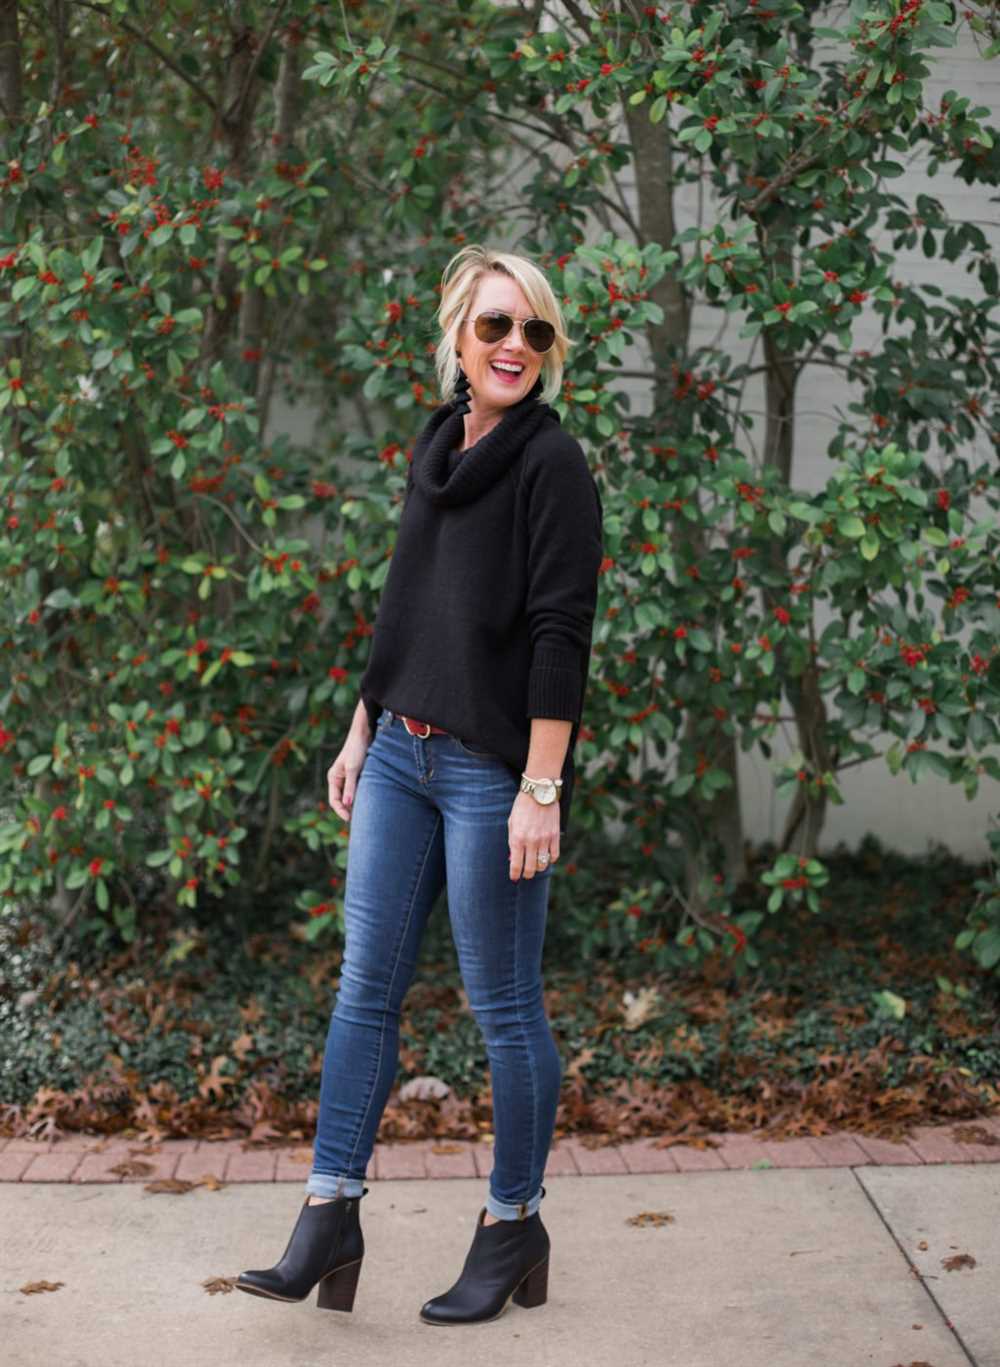 Styling ankle boots for different outfits